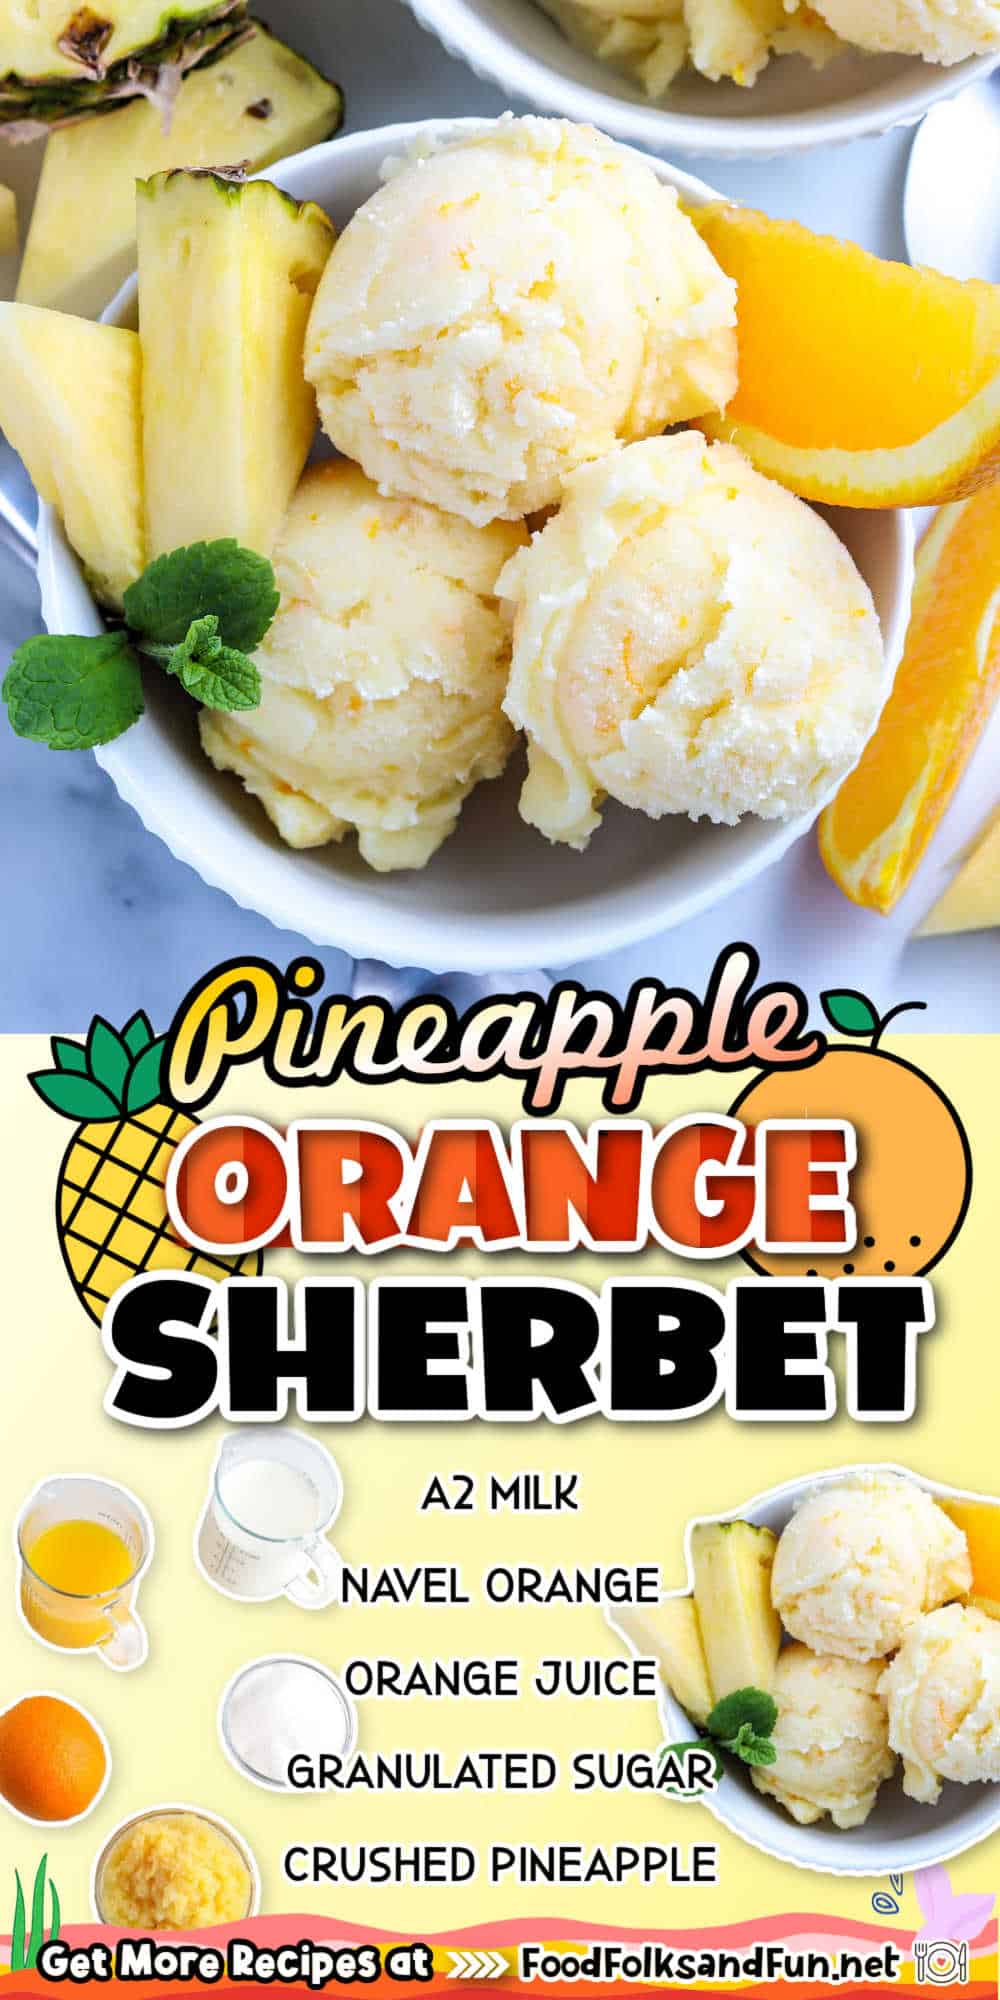 This orange sherbet with pineapple is simple to make and so refreshing. It’s just the thing to make when the weather starts to warm up!
 via @foodfolksandfun